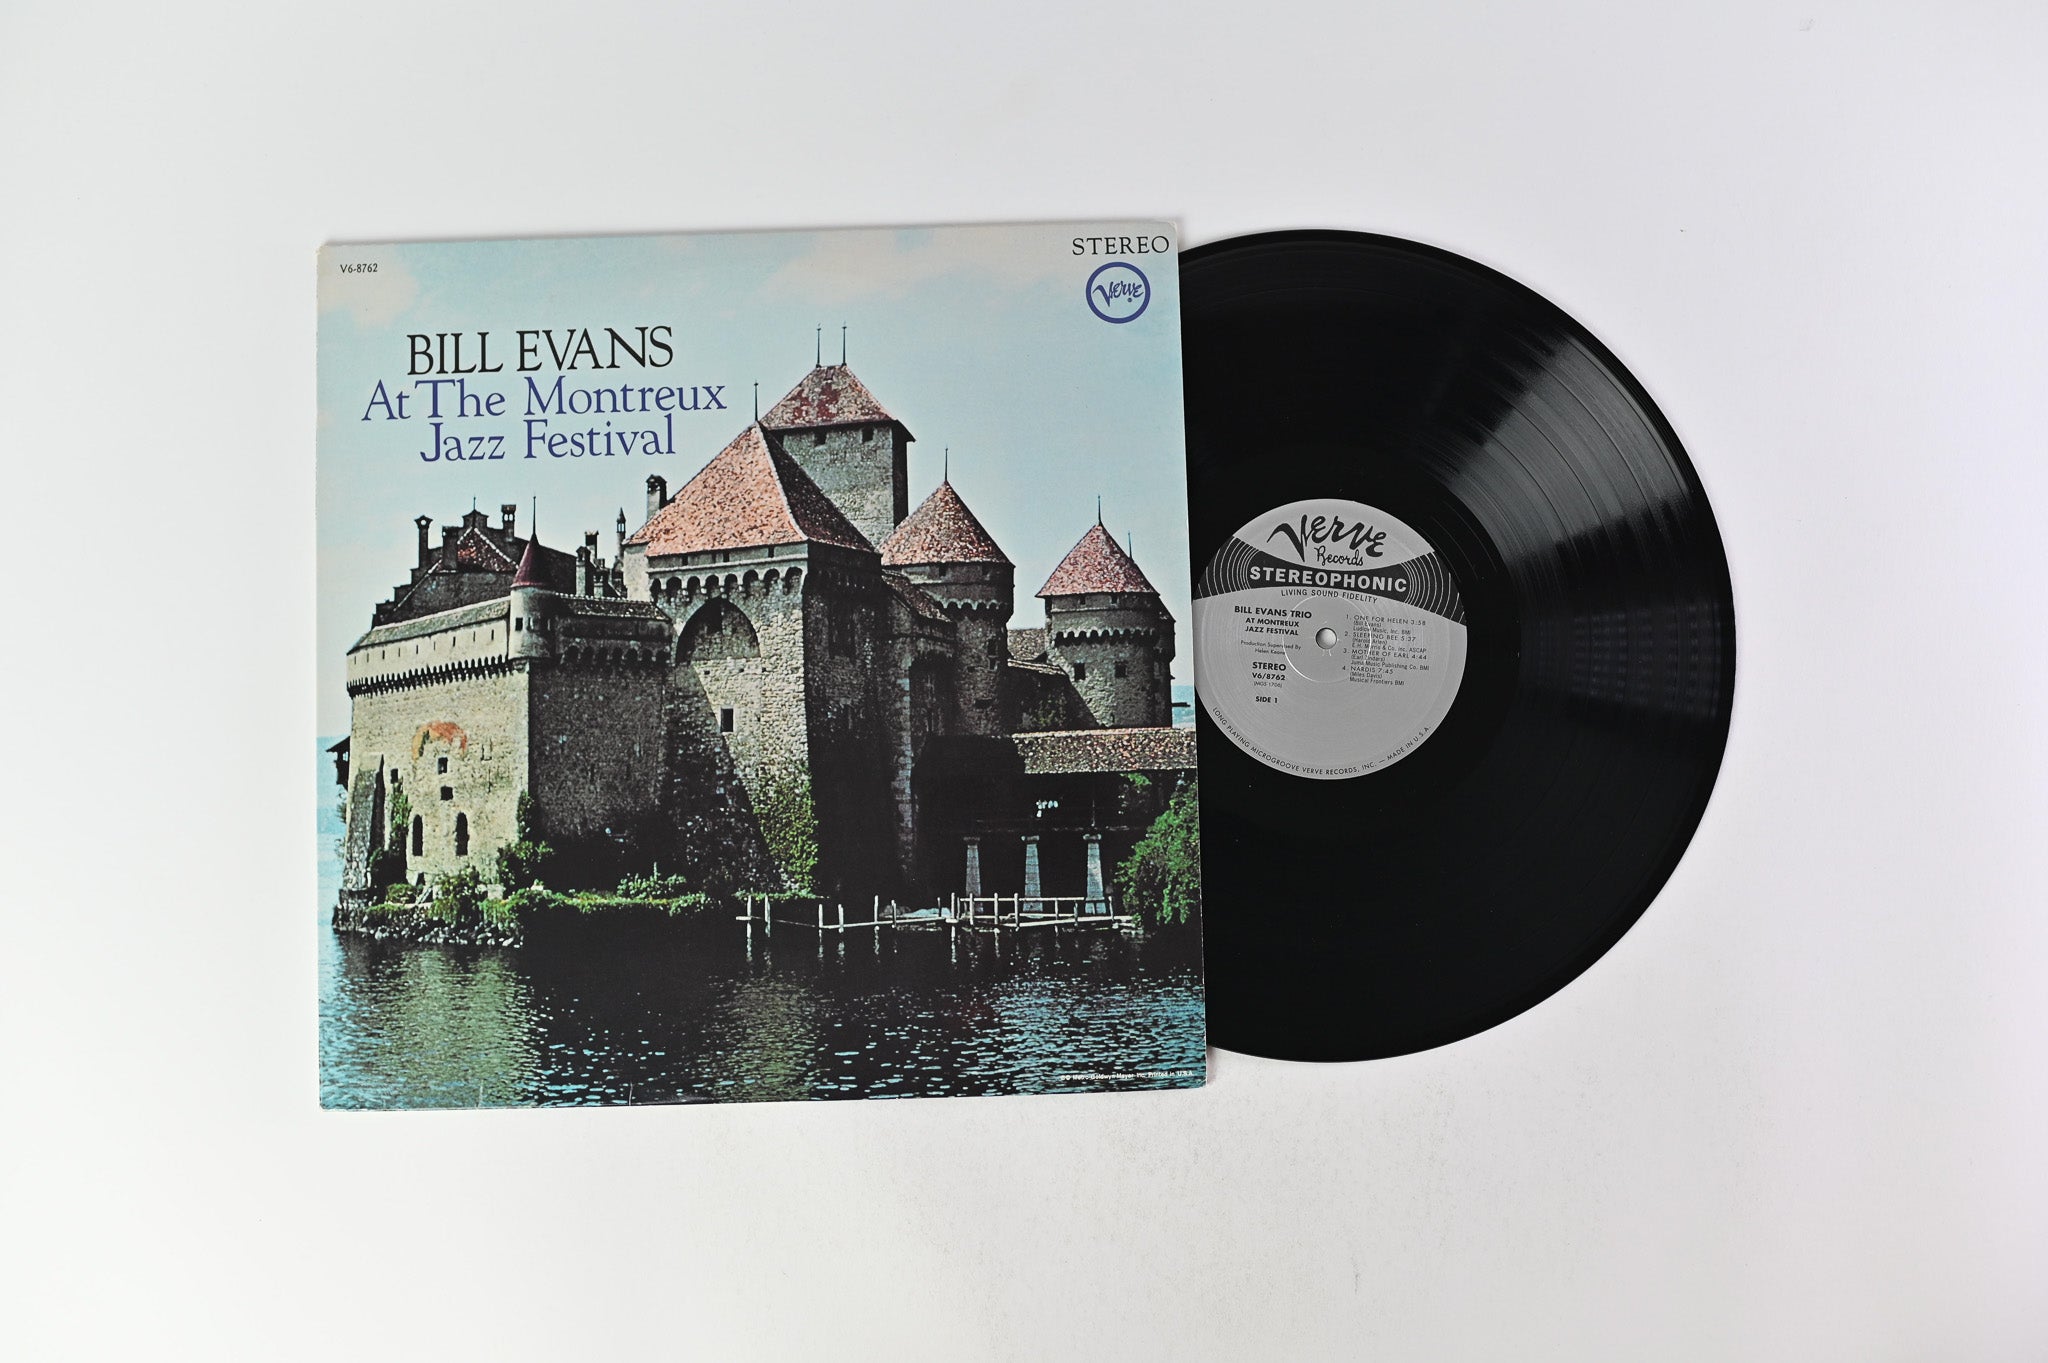 Bill Evans - At The Montreux Jazz Festival on Classic Records